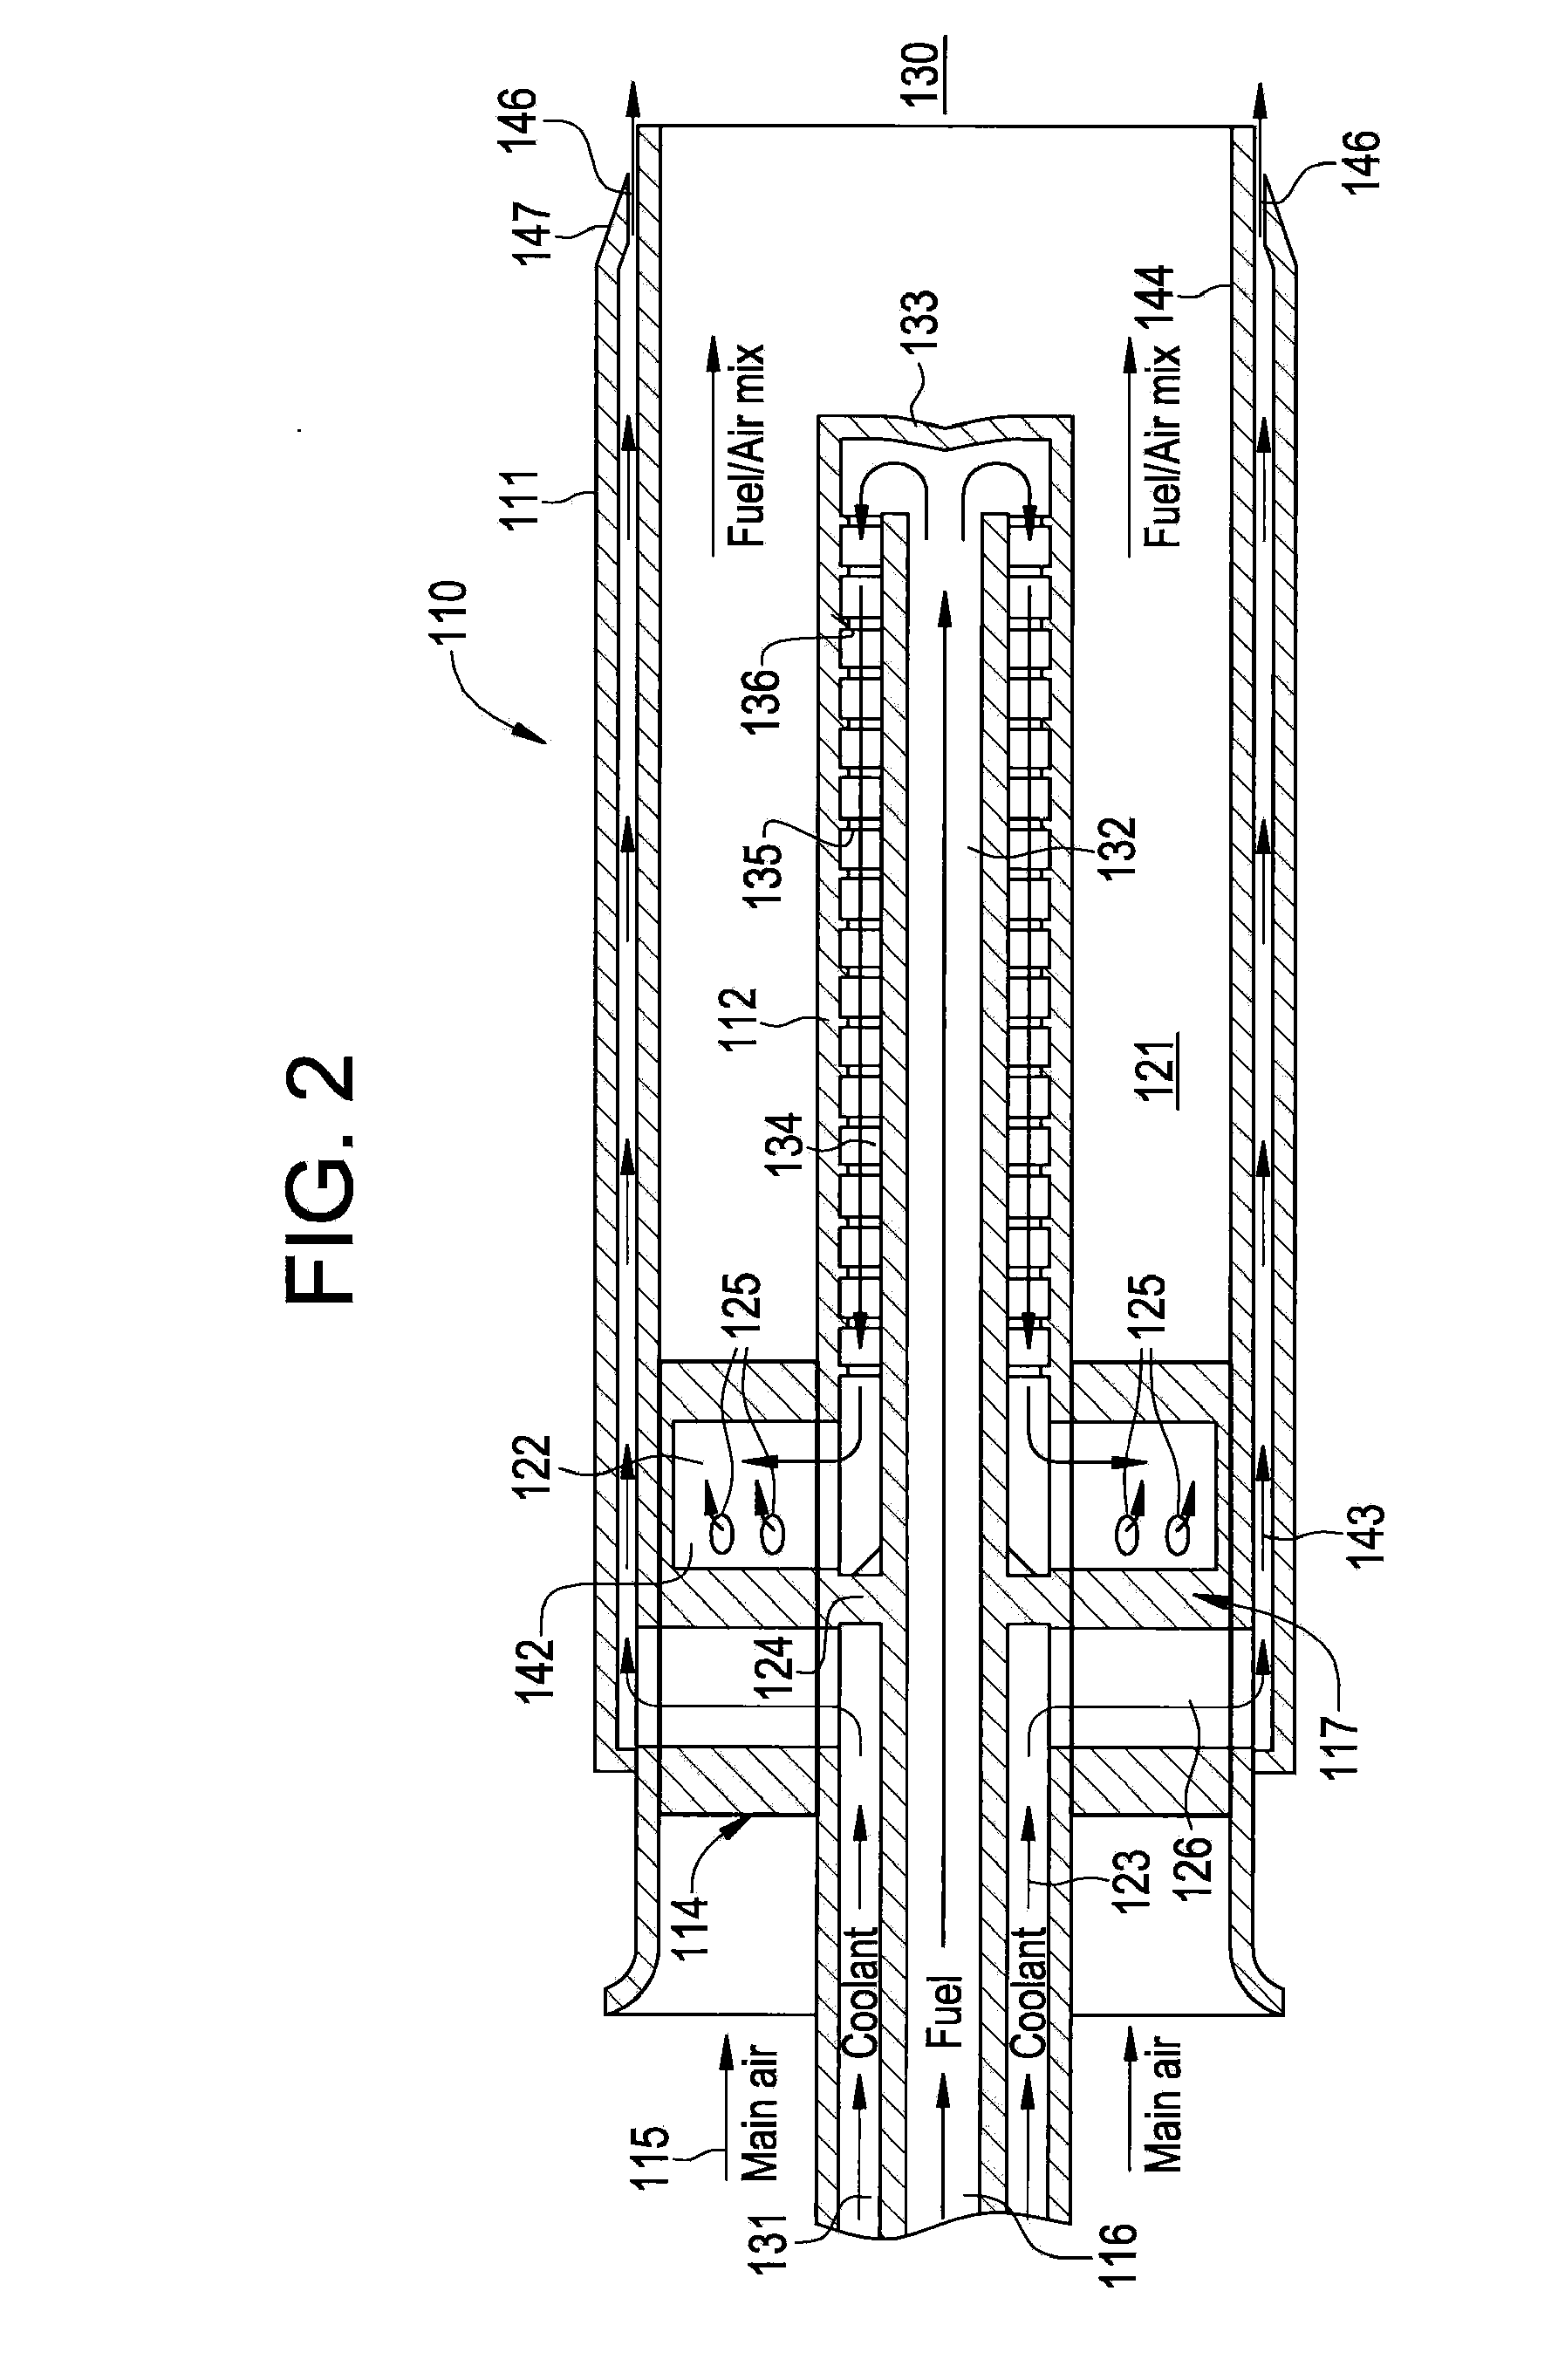 Flame Holding Tolerant Fuel and Air Premixer for a Gas Turbine Combustor